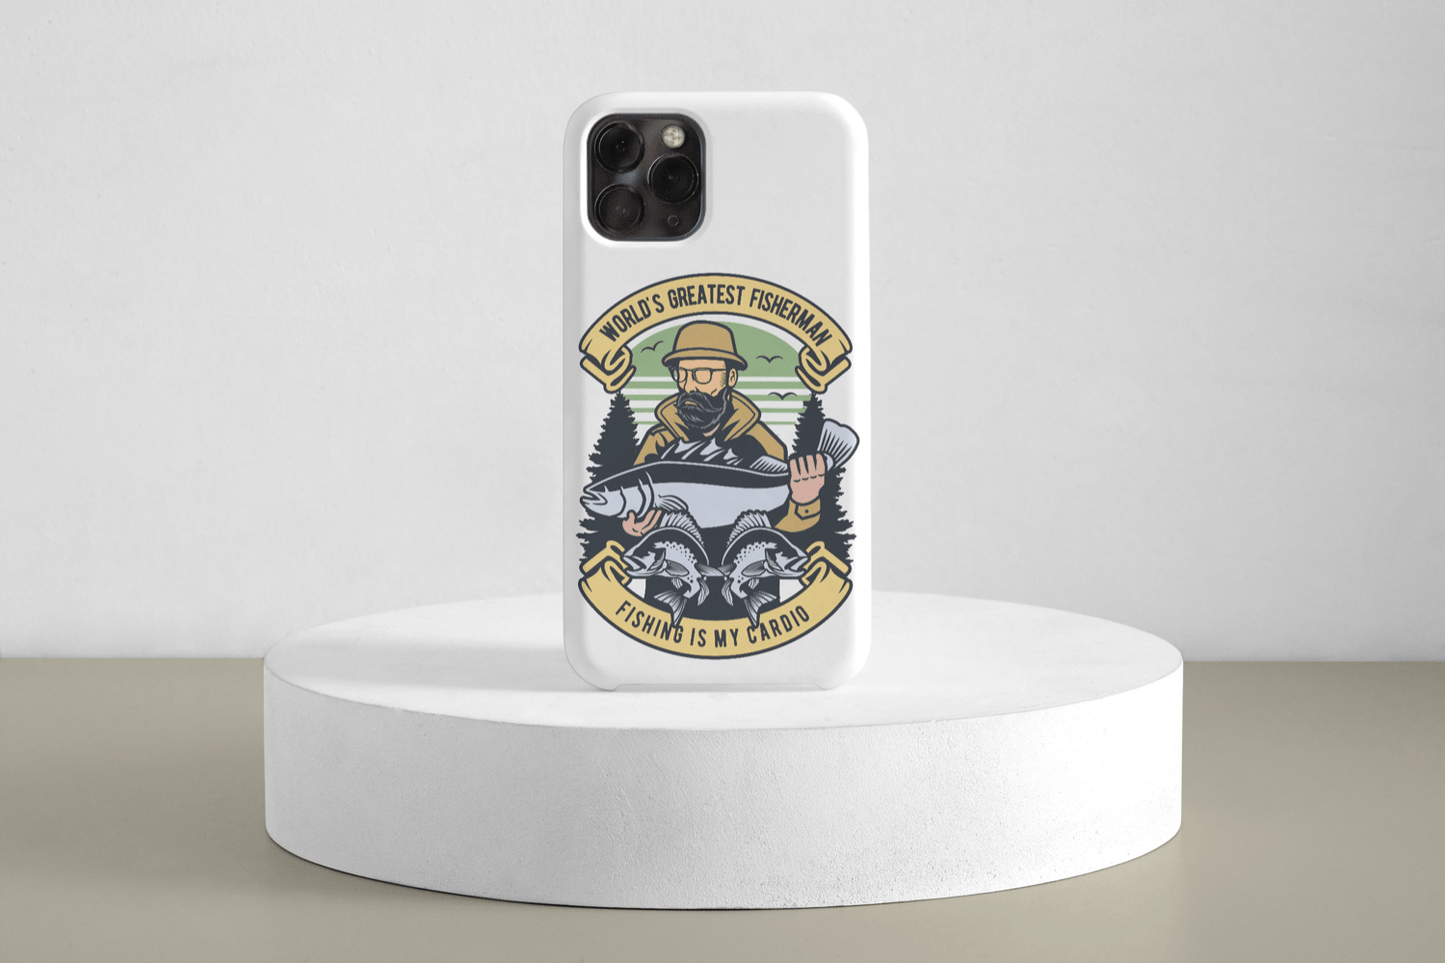 Galaxy Handyhülle - Worlds greatest Fisherman - Fishing is my Cardio - SmartPhone Cover